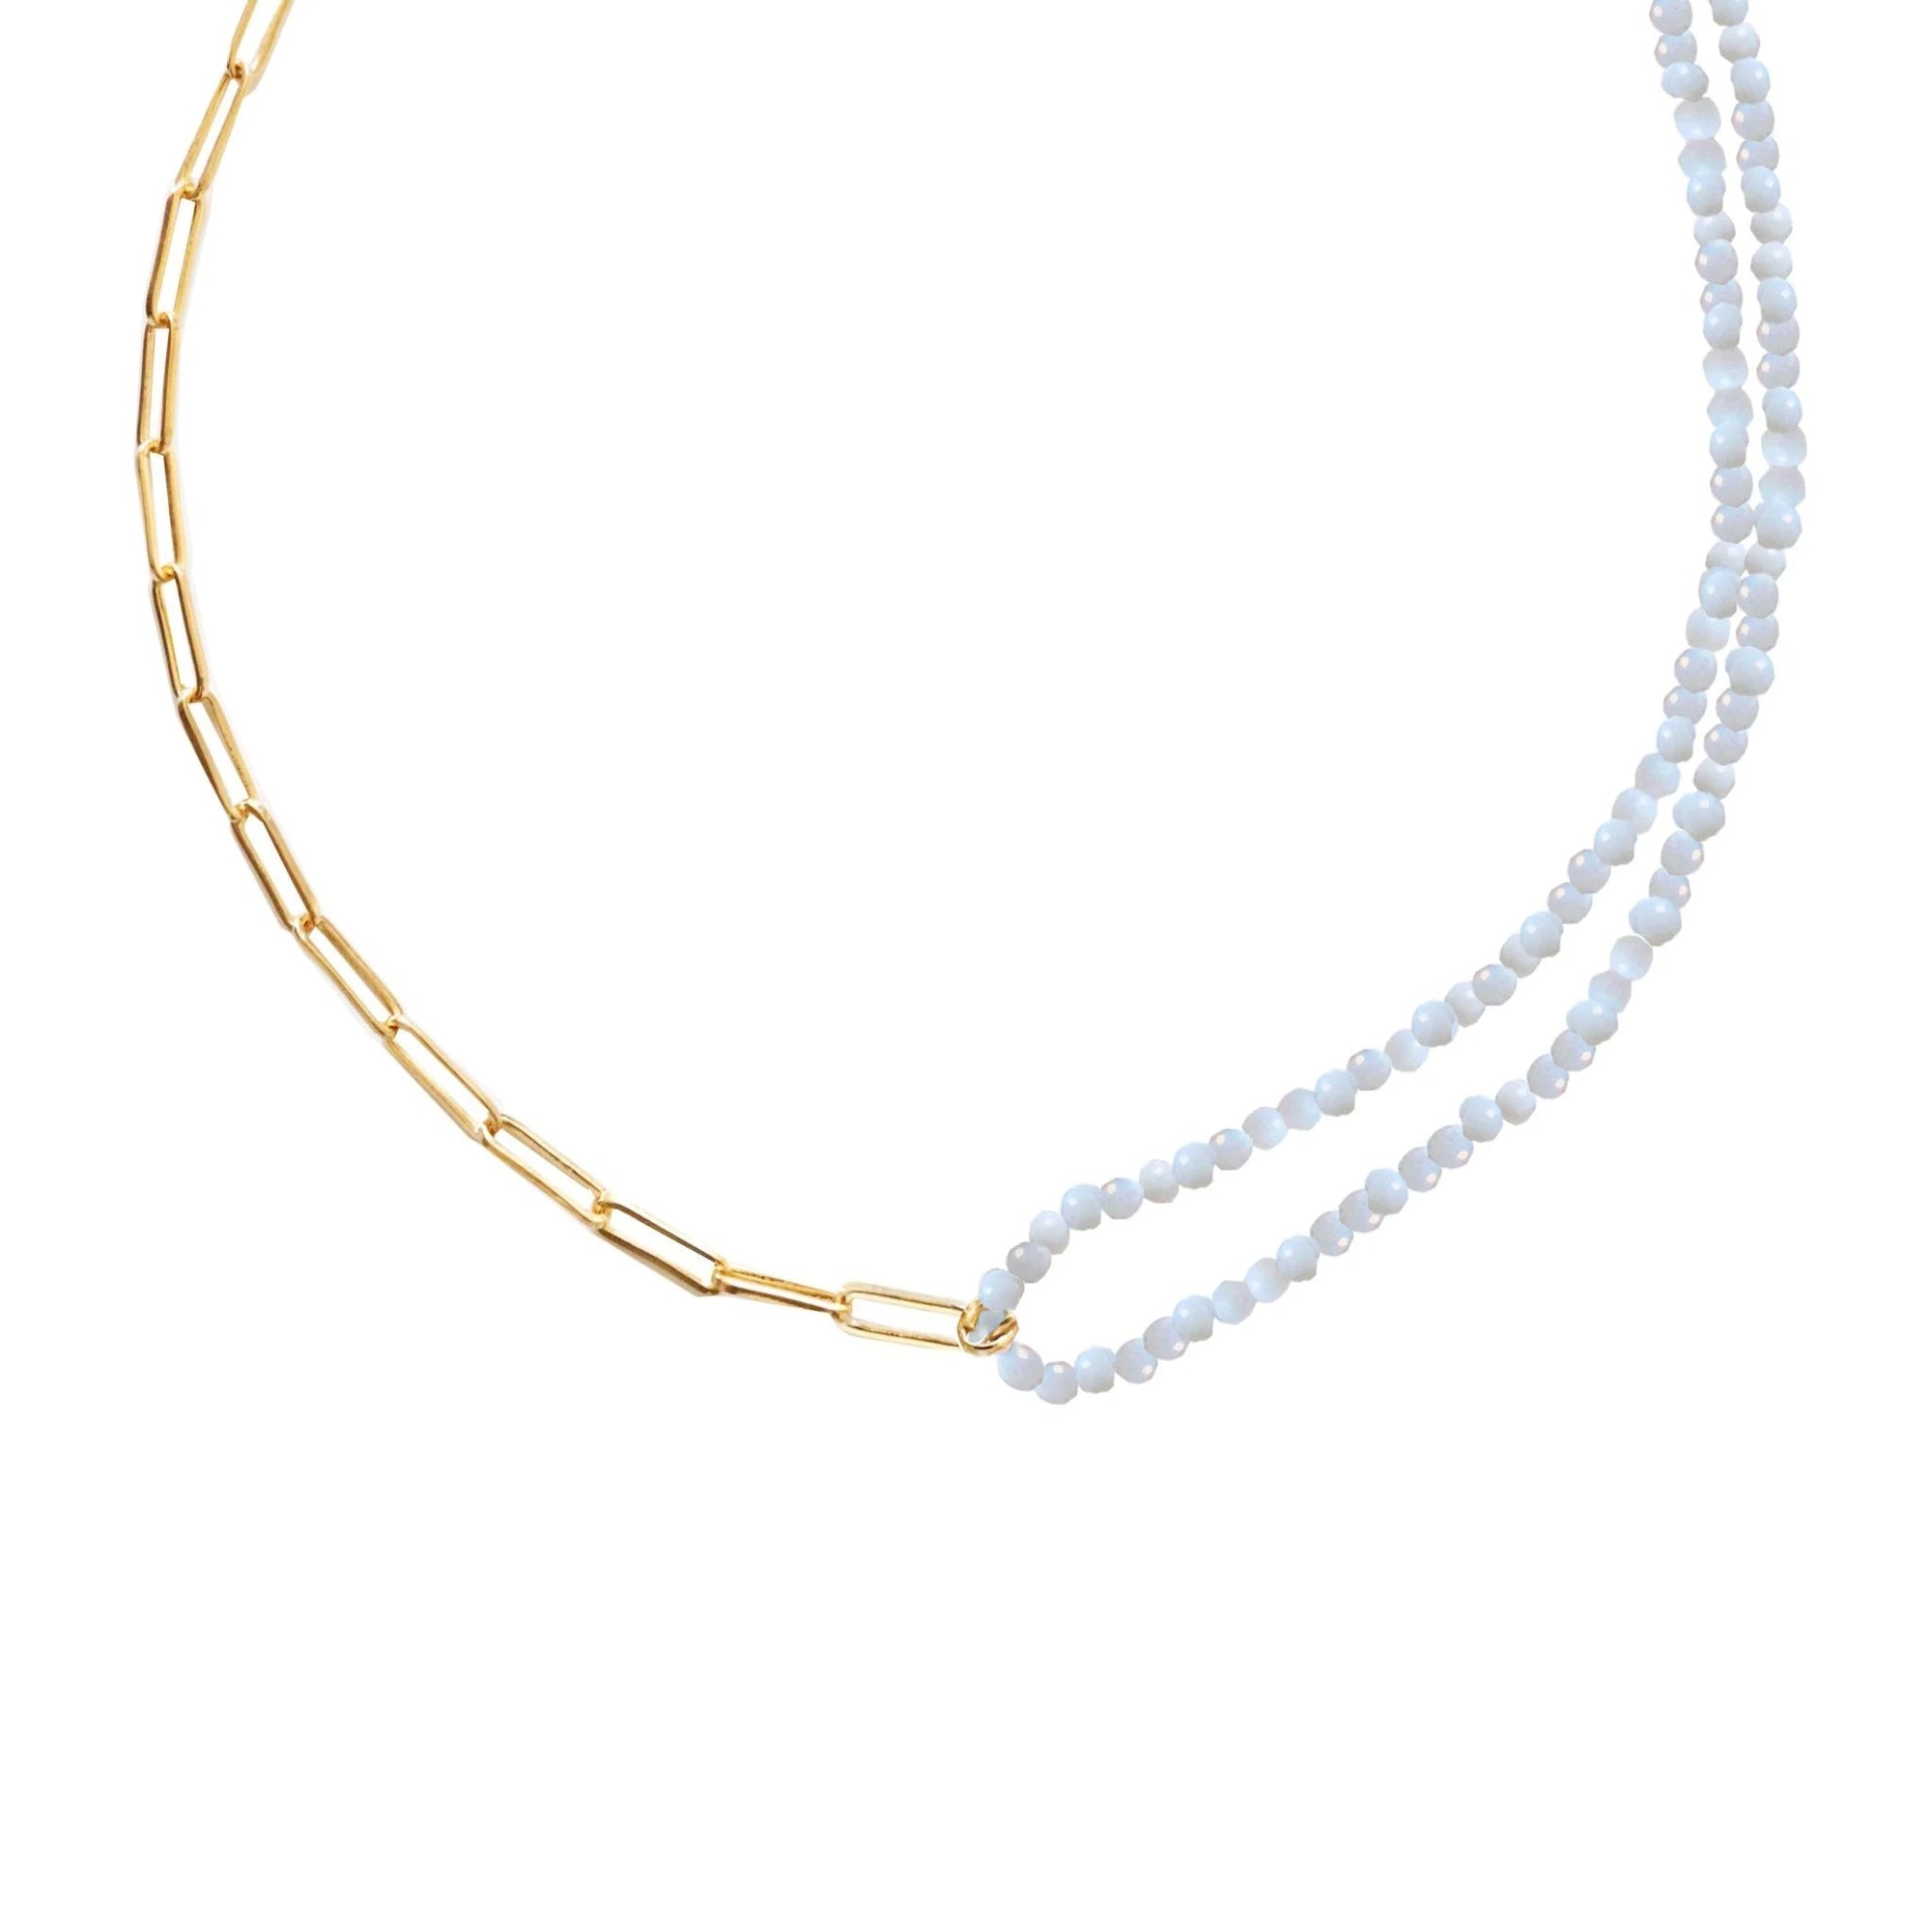 POISE BEADED LINK NECKLACE - ARCTIC BLUE OPAL & GOLD 14-17" - SO PRETTY CARA COTTER